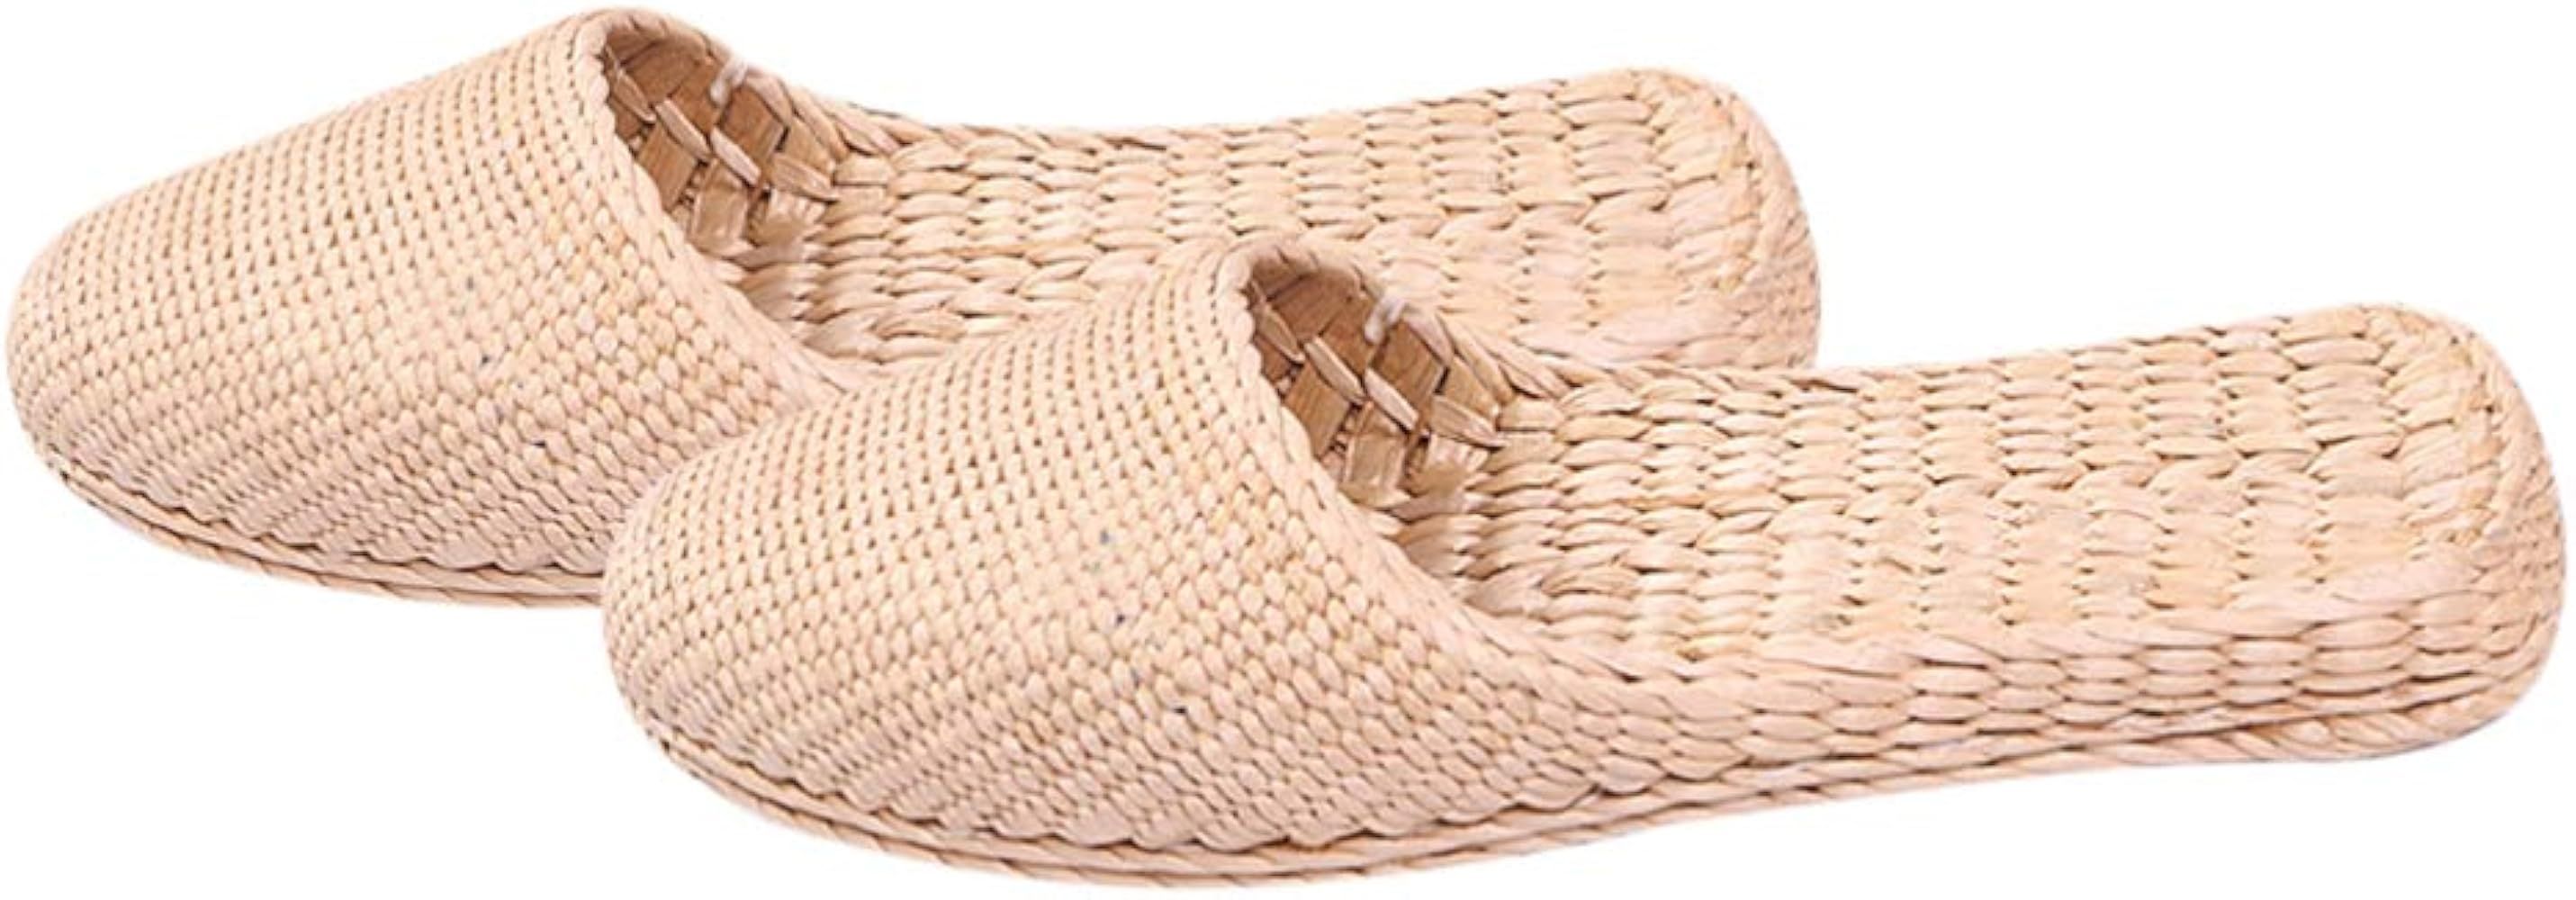 Holibanna Straw Sandals Slippers Handmade Casual Sandals Rattan Woven Slipper Shoes Natural Straw... | Amazon (US)